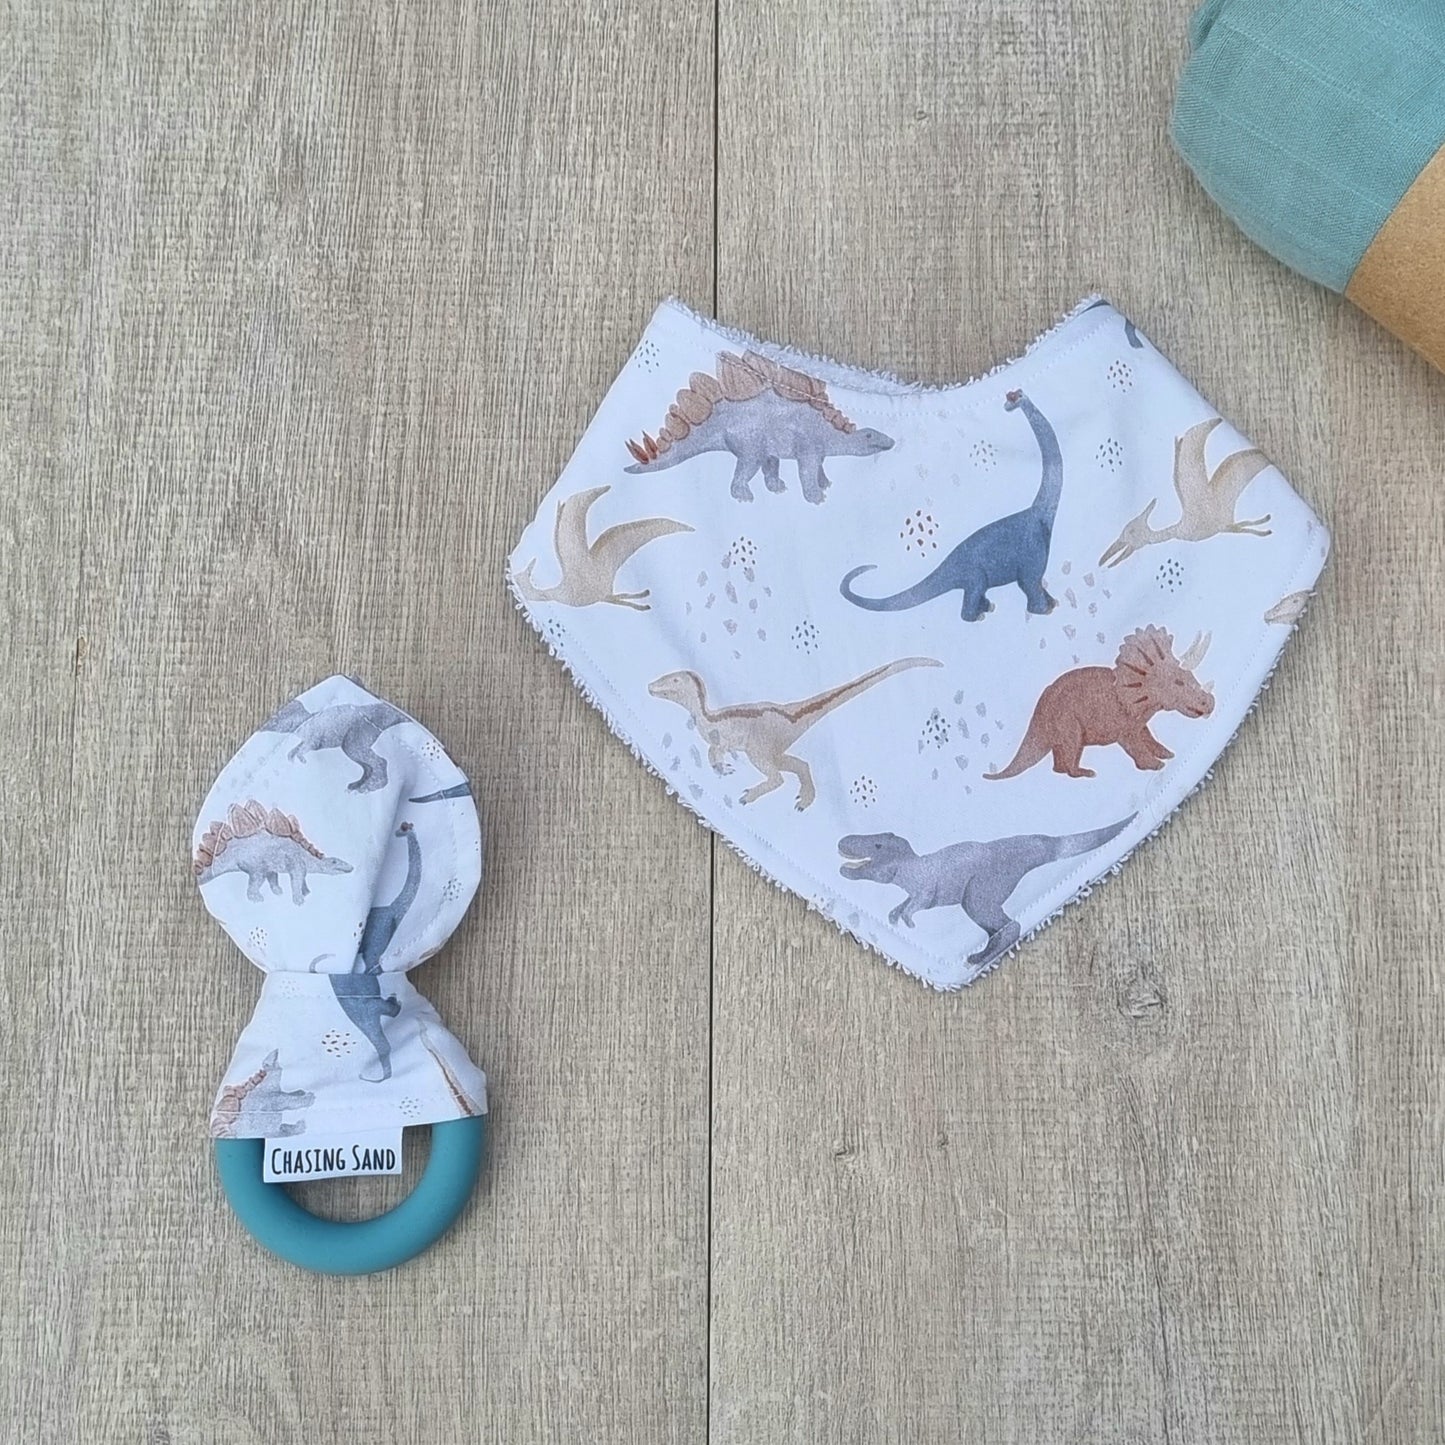 2 Piece Gift Set - Dino against wooden backdrop. Watercolour dinosaur illustrations white background. Each set contains 1x Dribble Bib and 1x Teether.